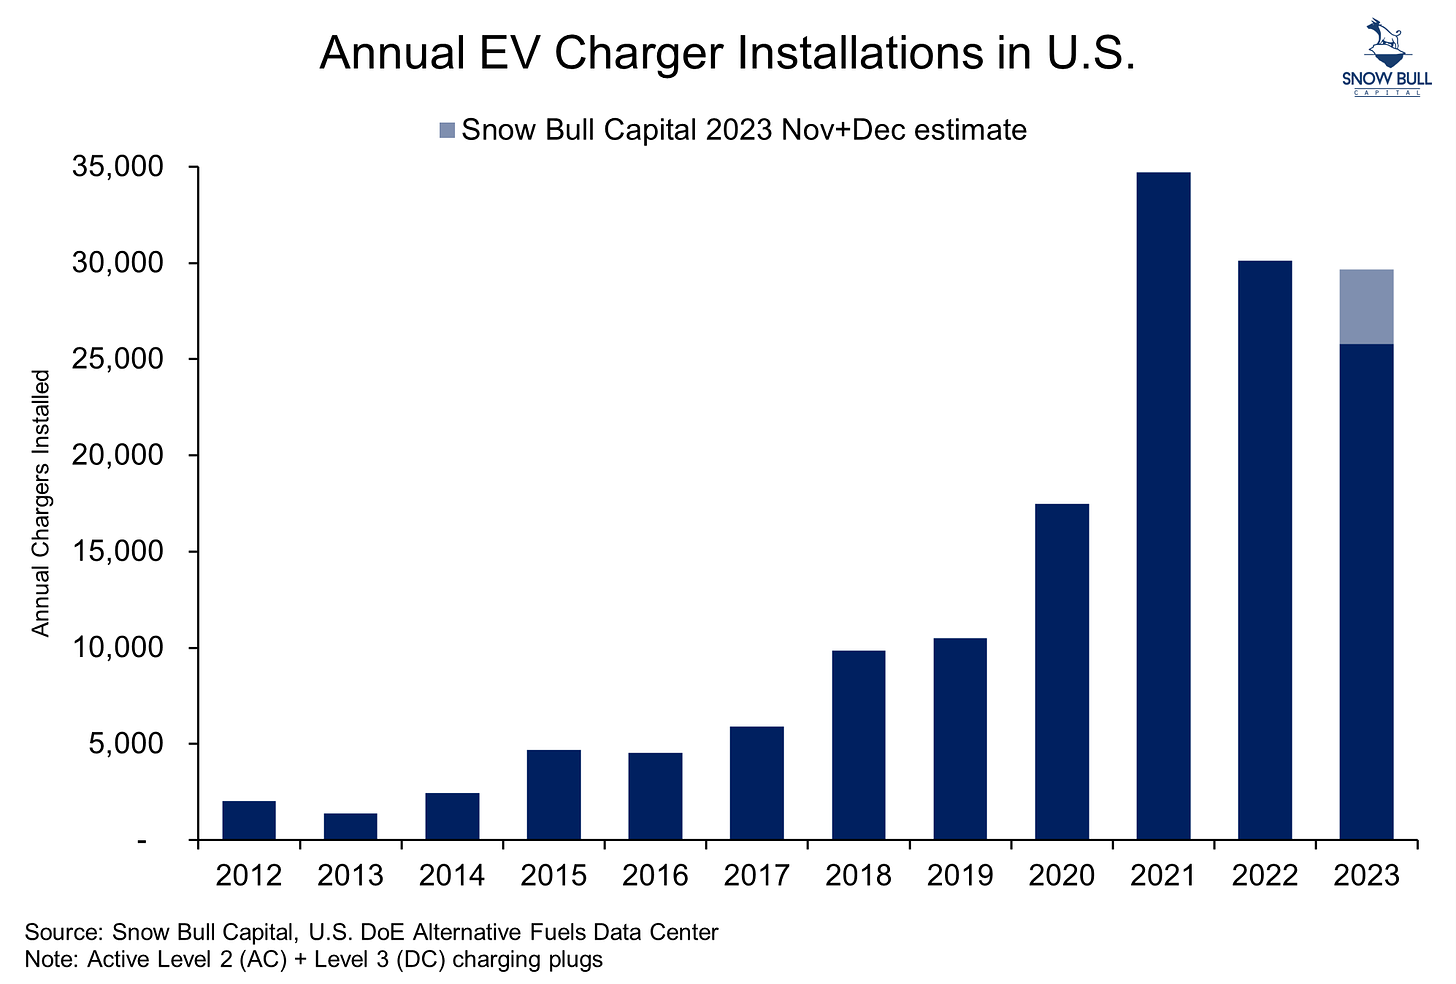 Bar chart illustrating the number of annual EV charger installations in the U.S. from 2012 through 2023, with a forecast for November and December 2023. A consistent increase in installations is observed over the years until 2022 and 2023, as each is fewer than the previous year.